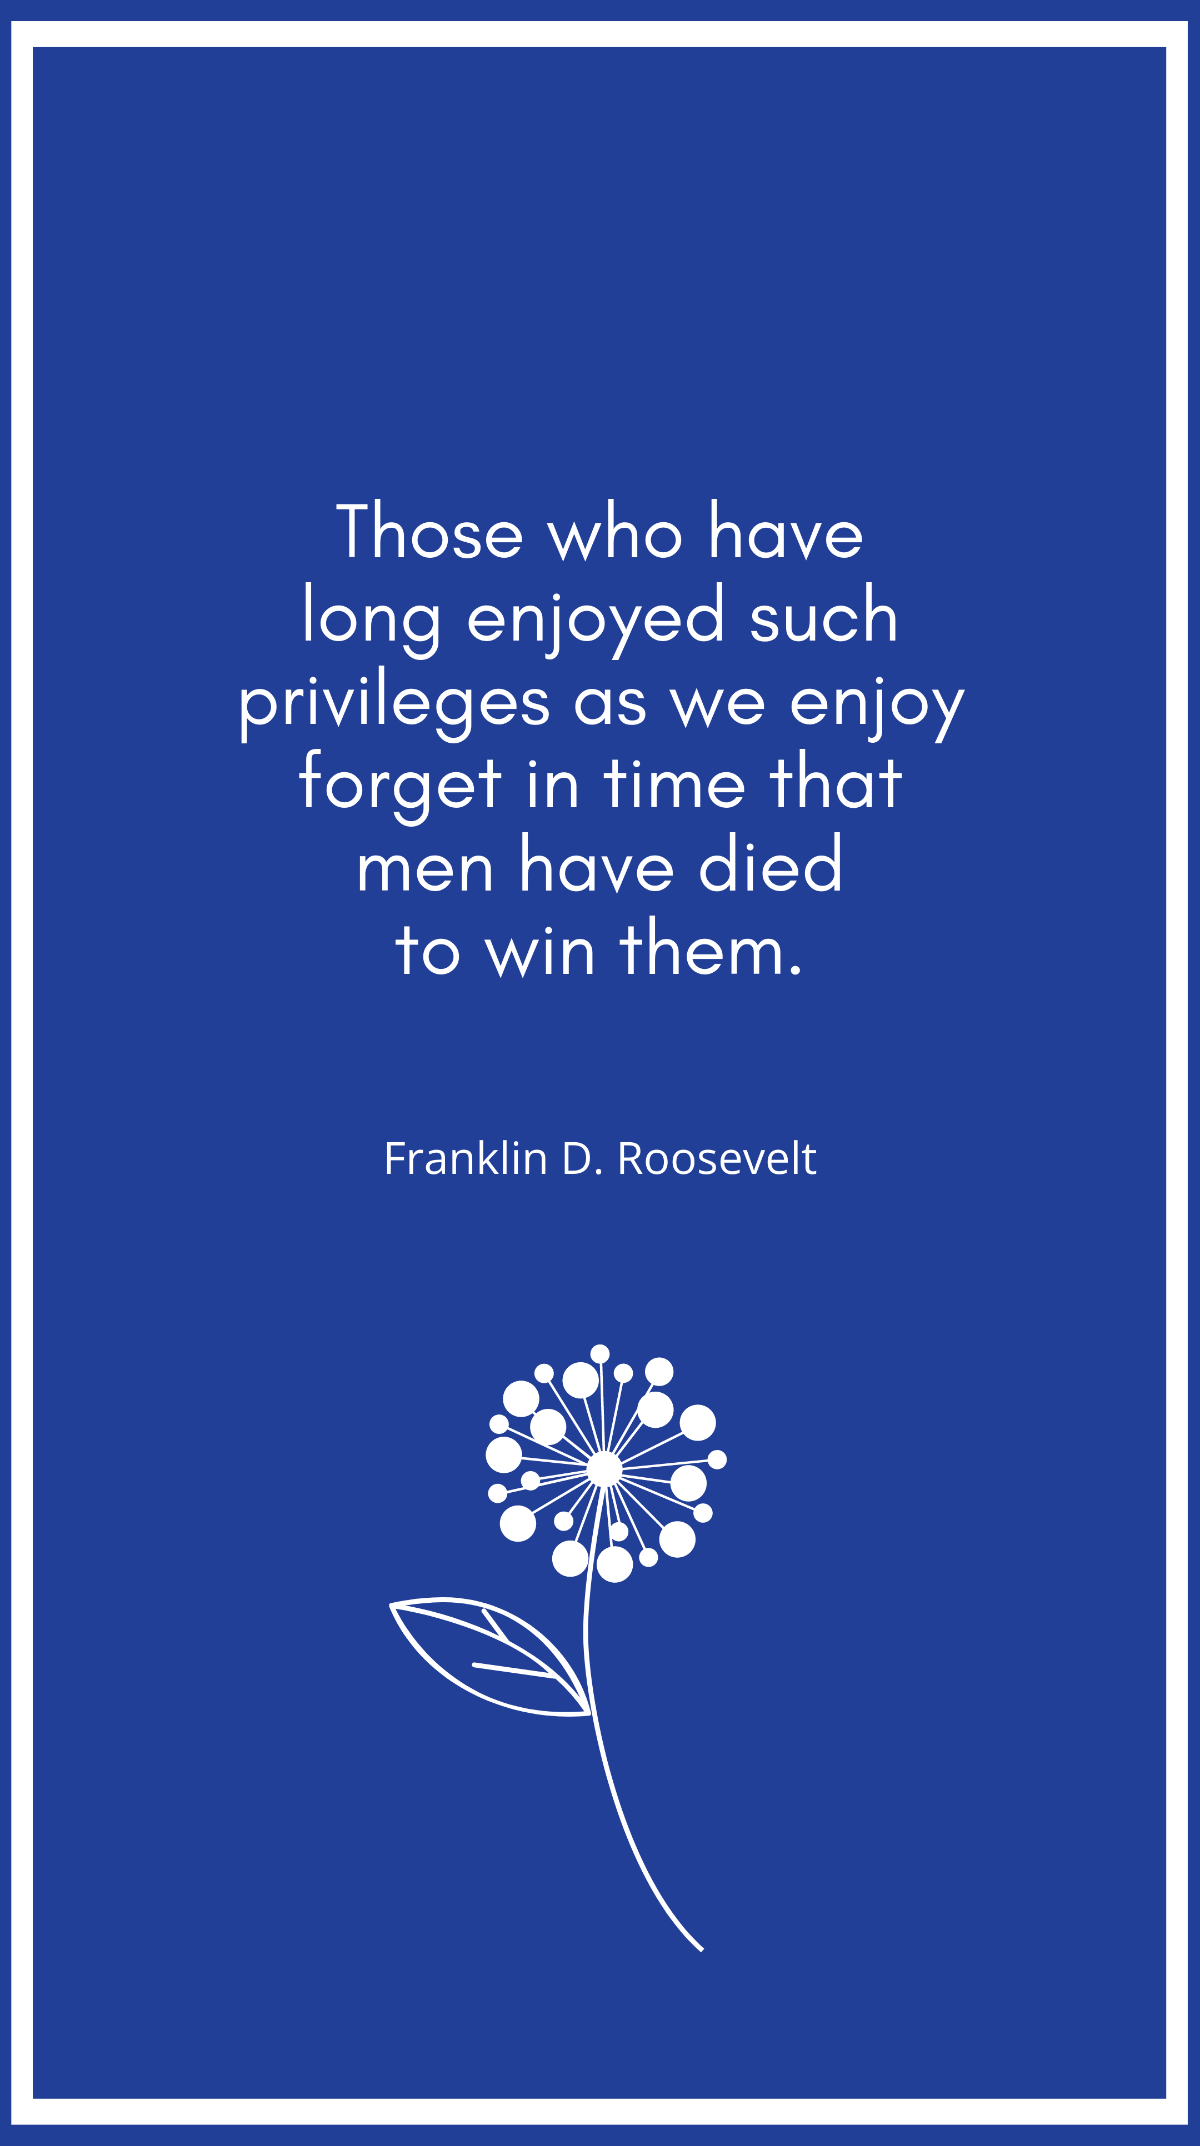 Free Franklin D. Roosevelt - Those who have long enjoyed such privileges as we enjoy forget in time that men have died to win them. Template